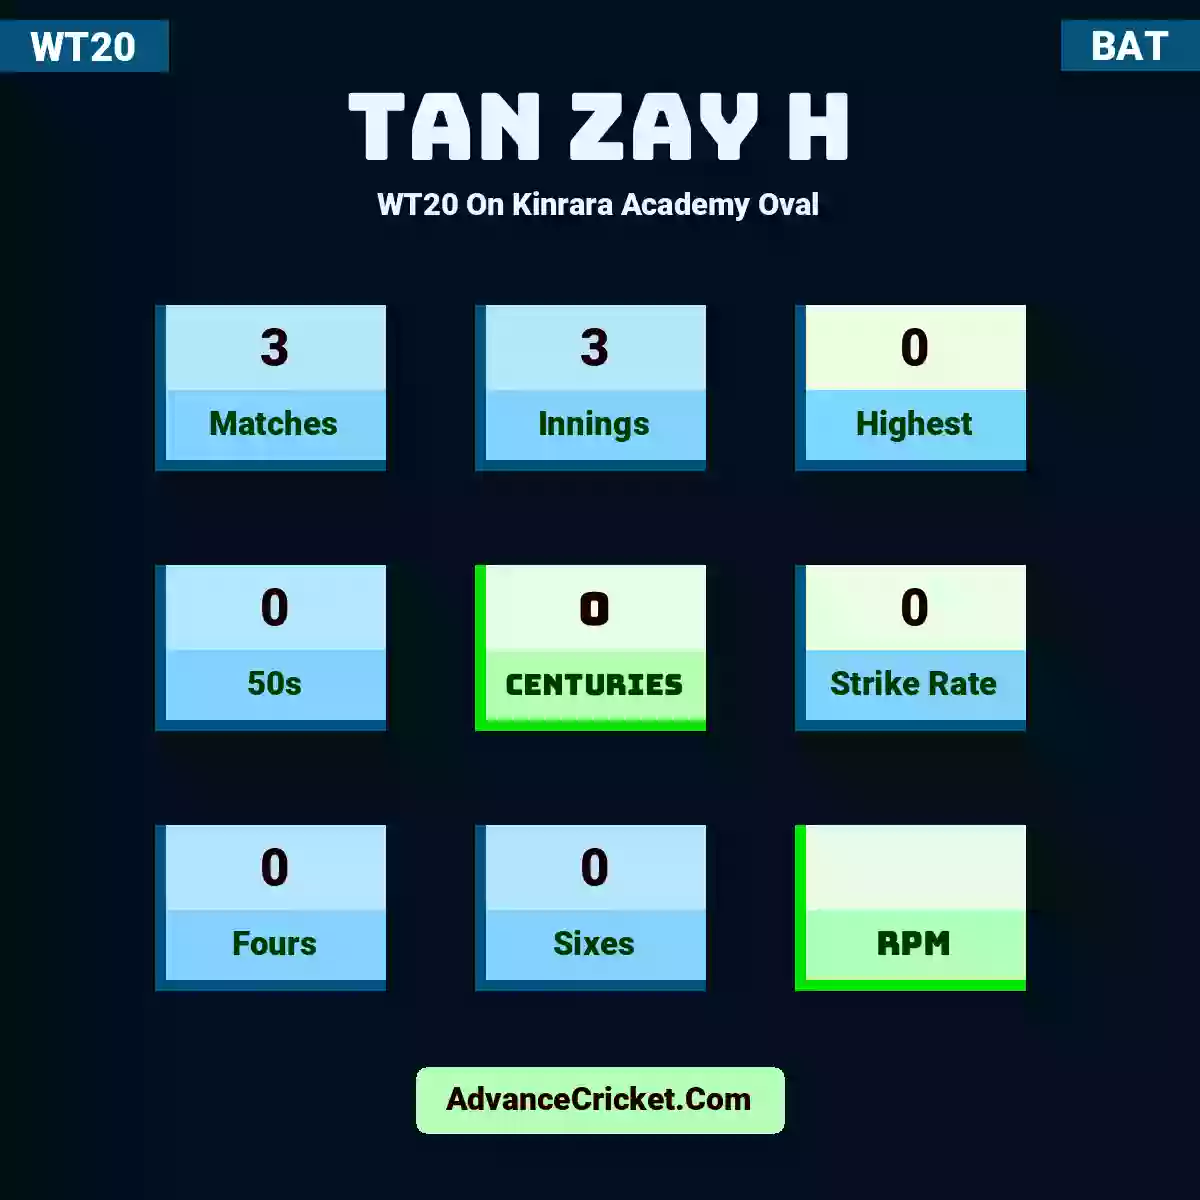 Tan Zay H WT20  On Kinrara Academy Oval, Tan Zay H played 3 matches, scored 0 runs as highest, 0 half-centuries, and 0 centuries, with a strike rate of 0. T.Zay.H hit 0 fours and 0 sixes.